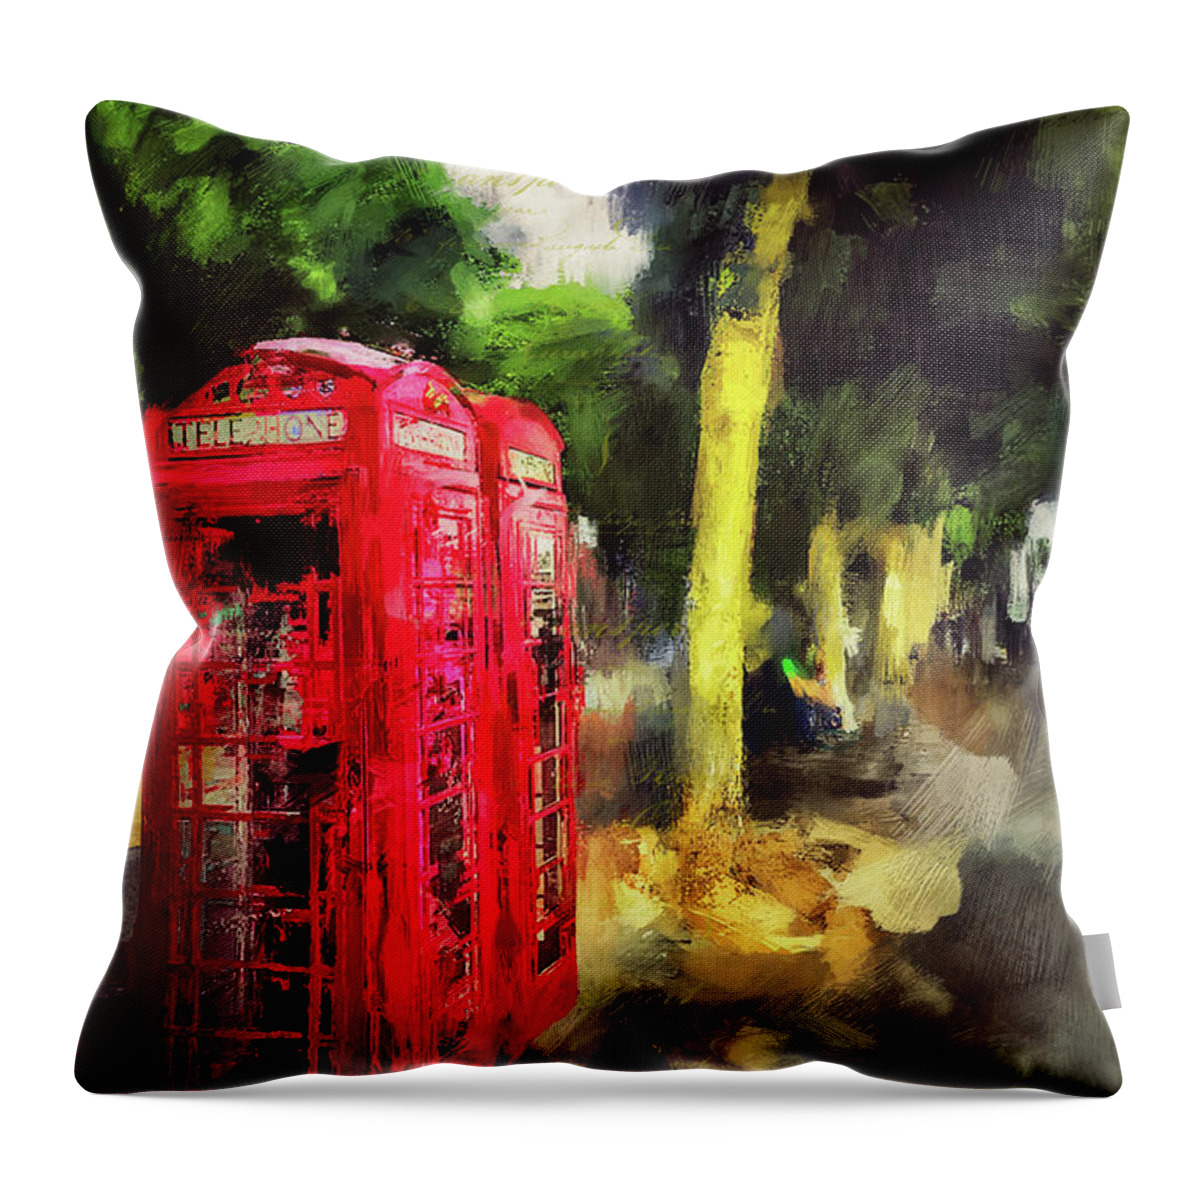 London Throw Pillow featuring the digital art Embankment #1 by Nicky Jameson